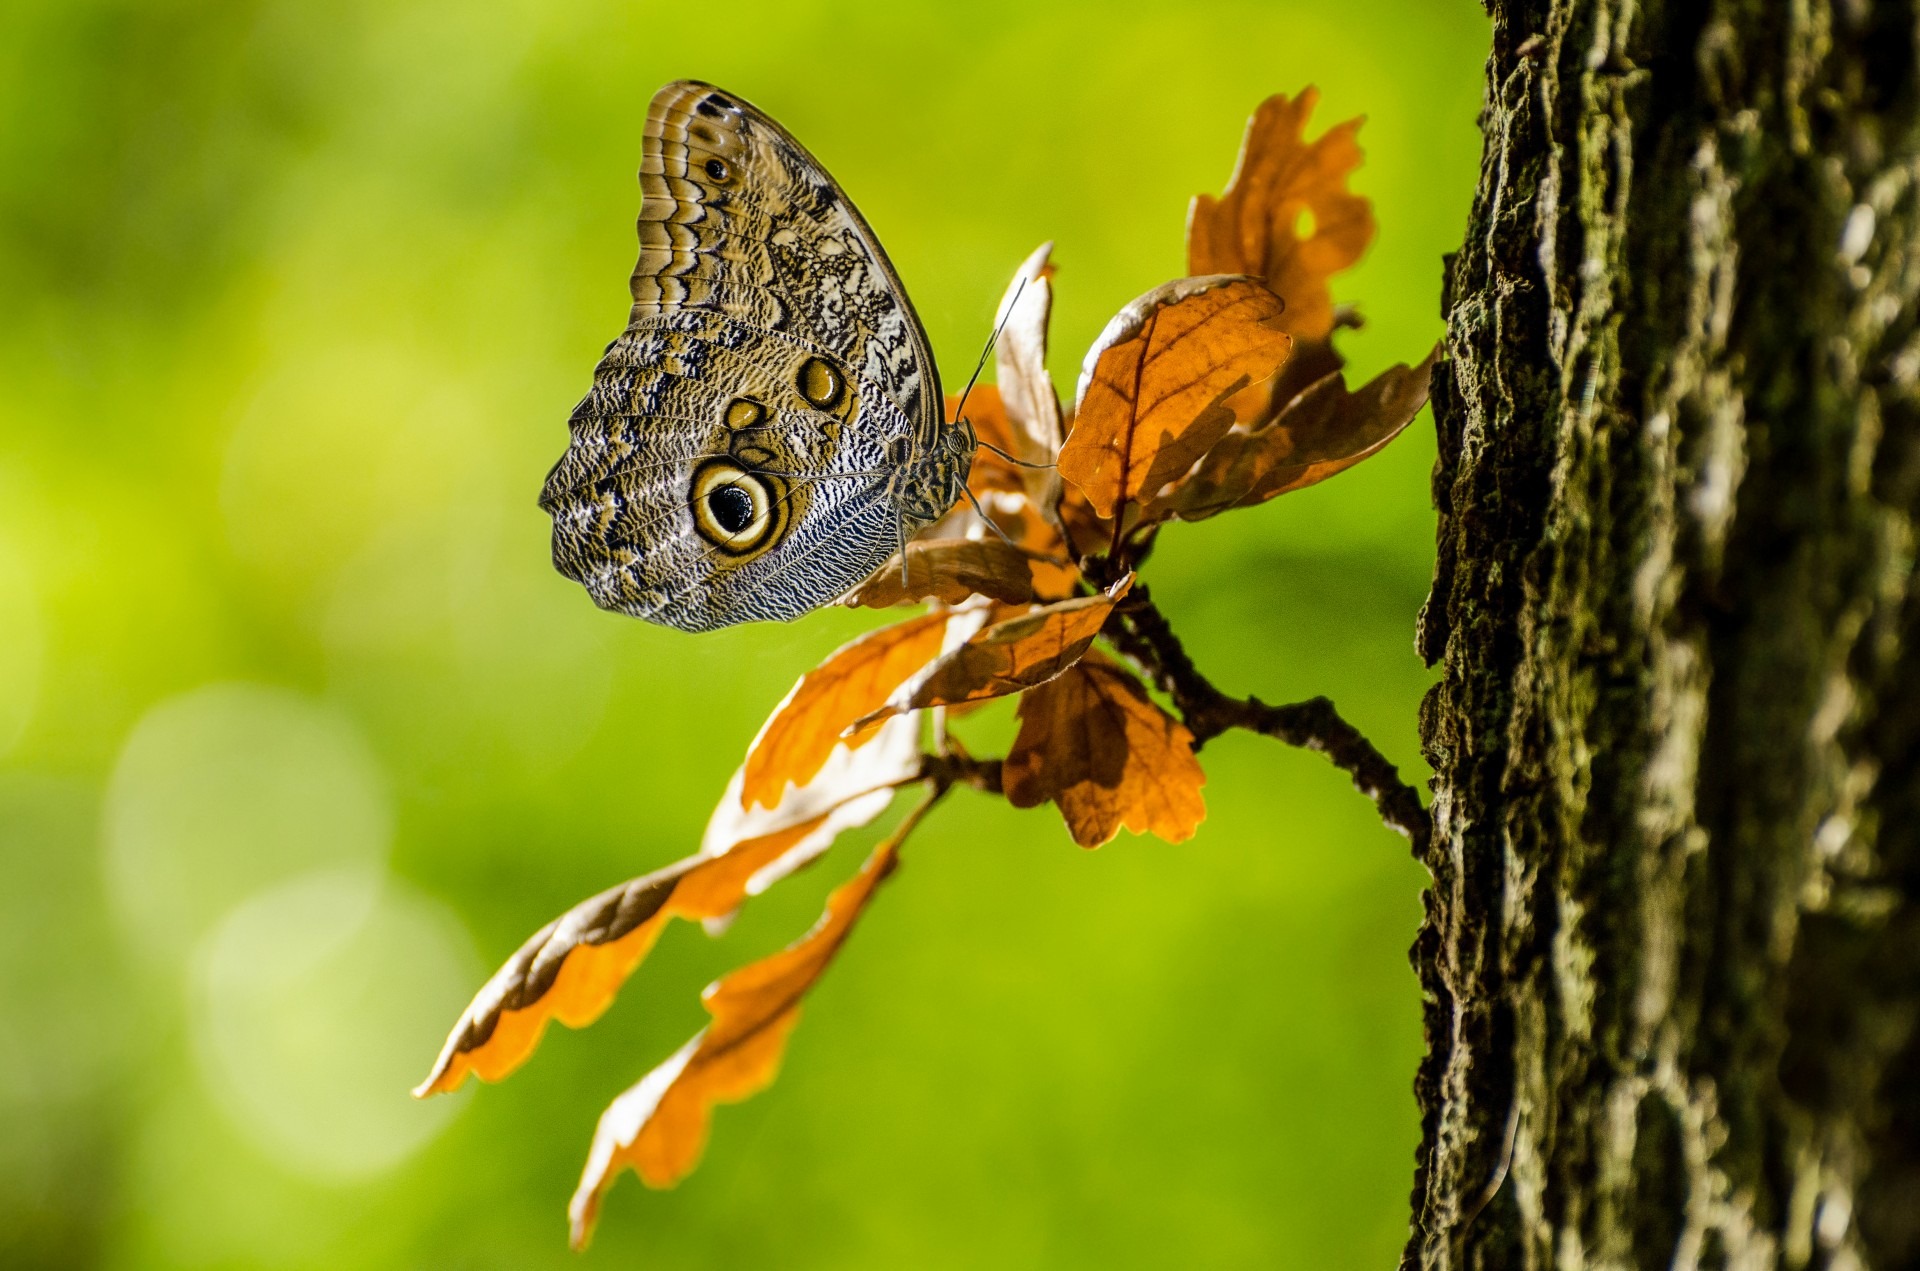 Butterfly on a Tree Shoot by PublicDomainPictures